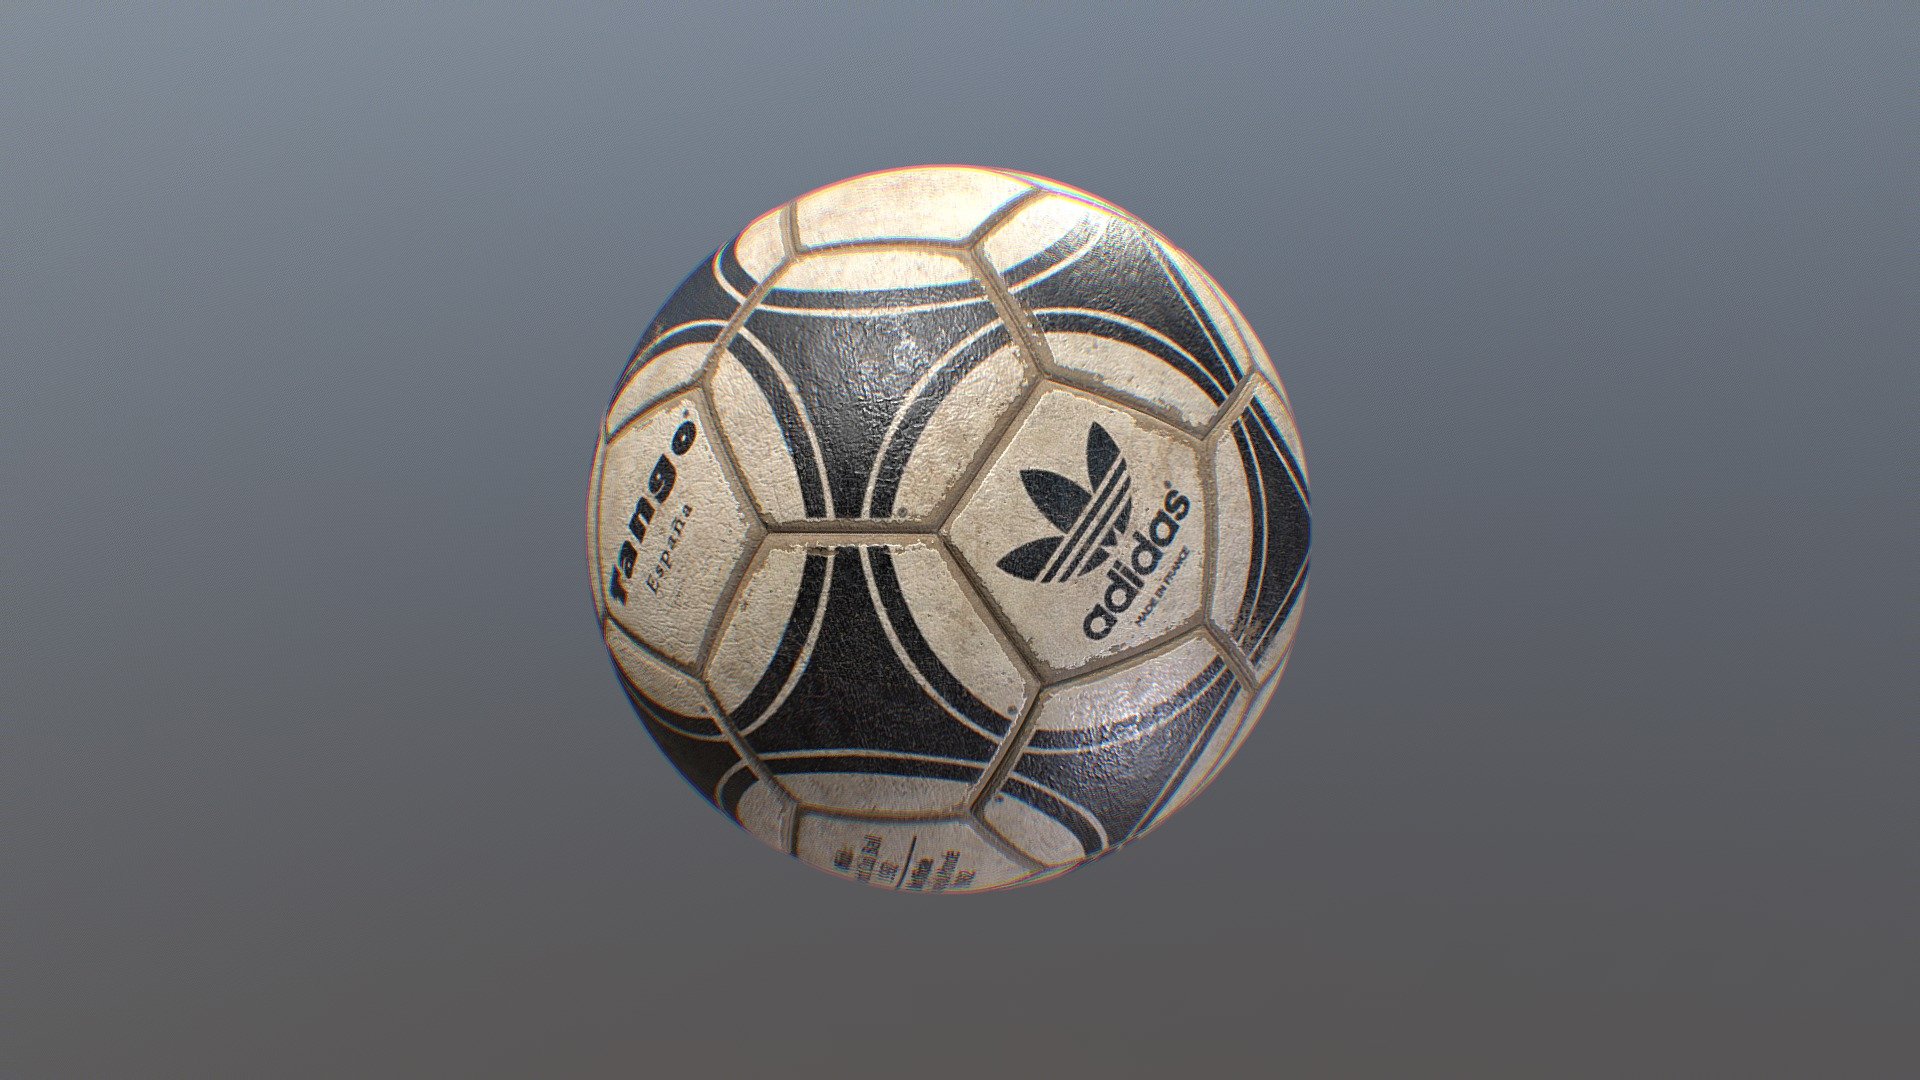 A low-poly model of worn vintage 1982 FIFA World Cup ball - Vintage Soccer Ball (Adidas Tango 1982) - 3D model by Mike85 (@428147128417) 3d model